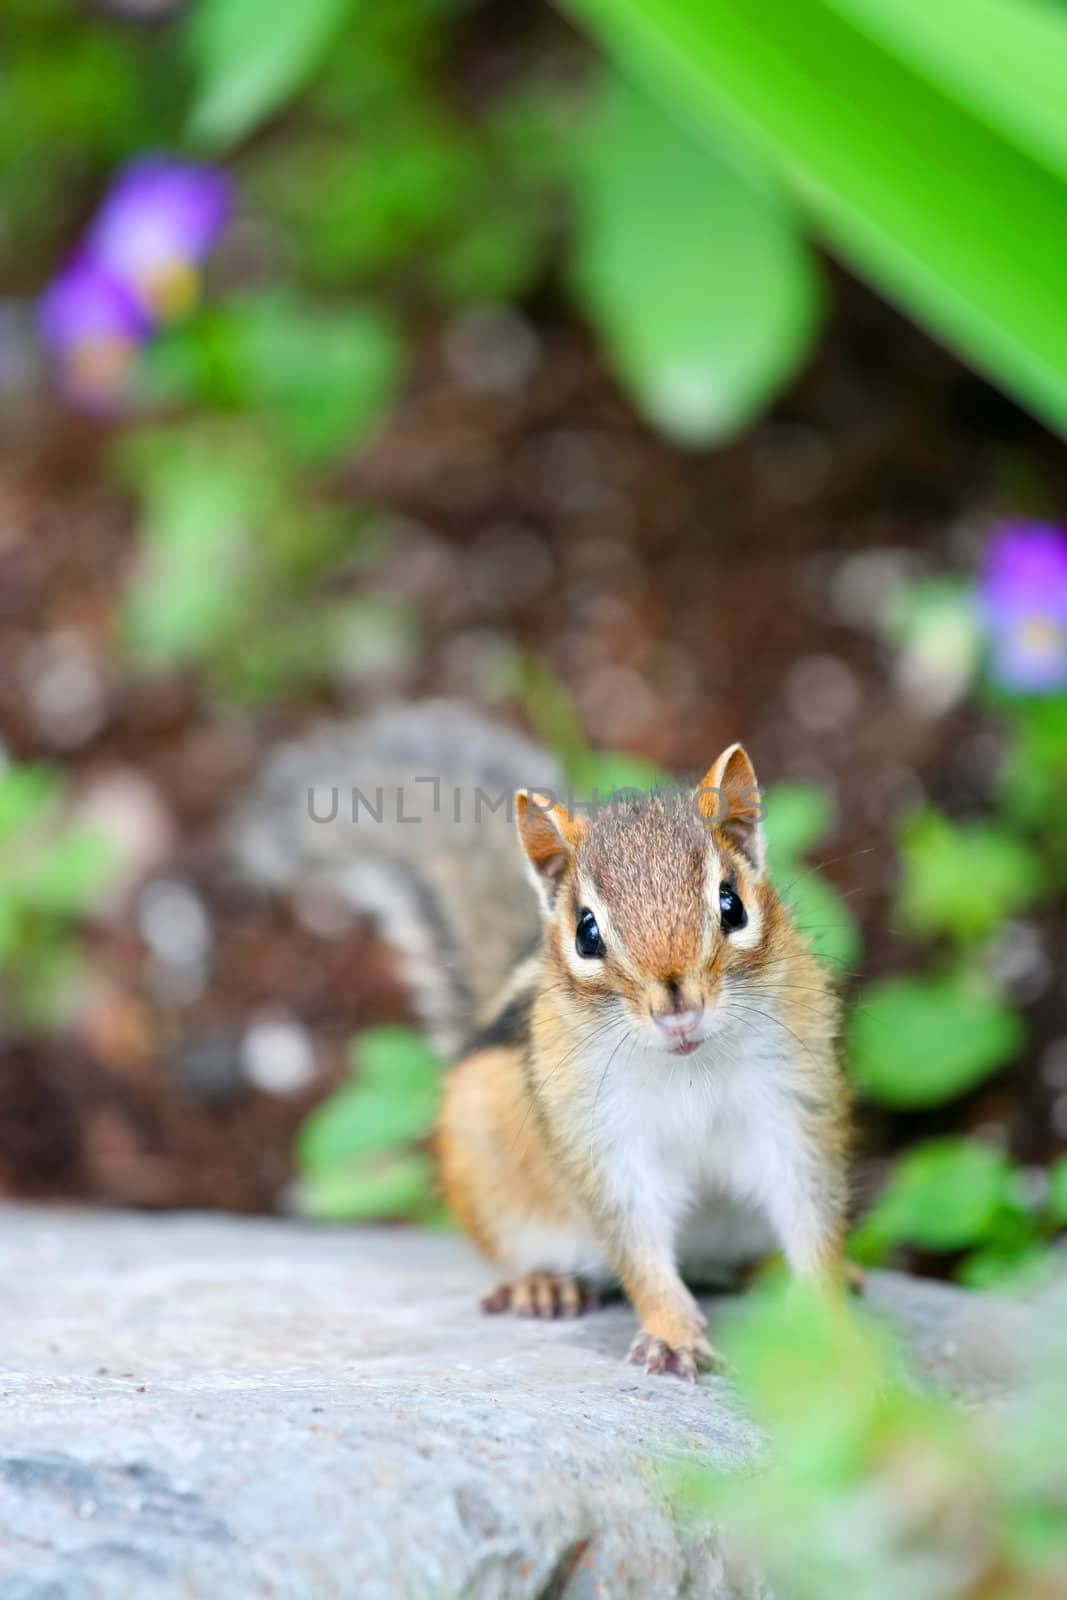 Adorable chipmunk on log looking on curiously by jarenwicklund